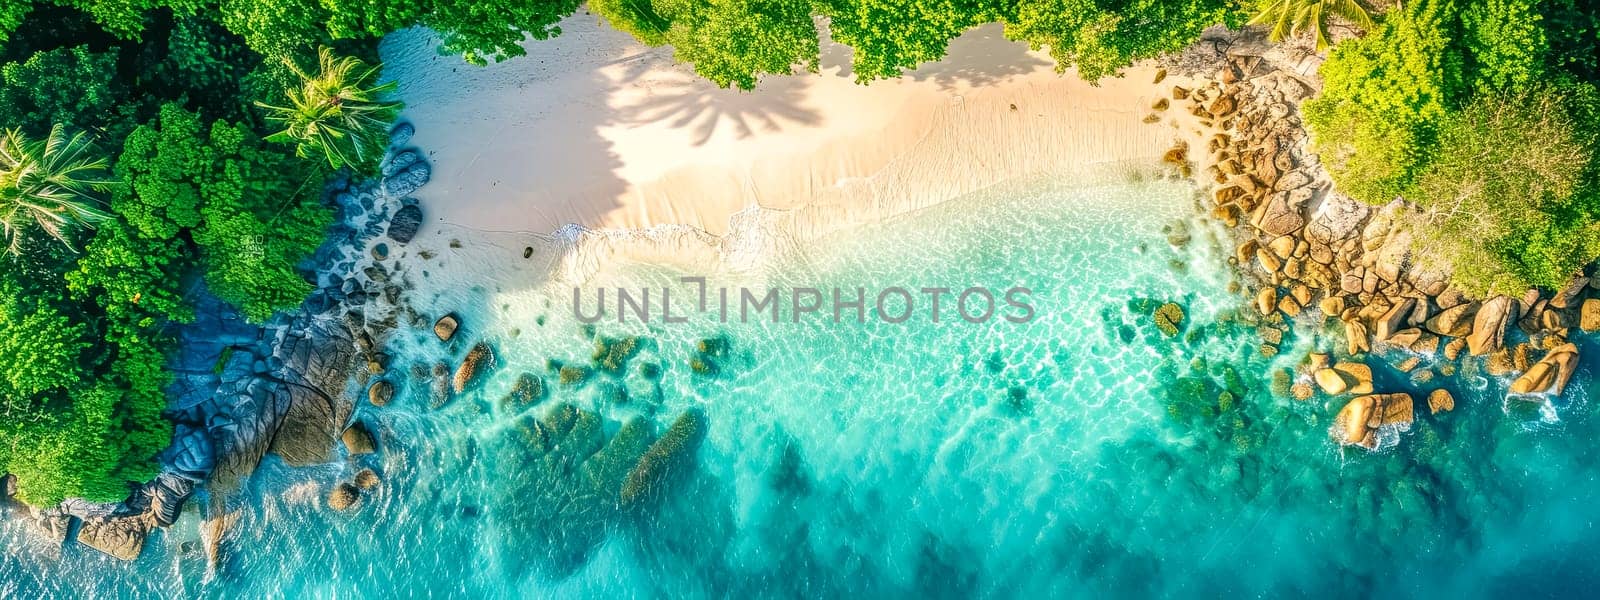 Aerial view of a tropical paradise with clear turquoise waters, white sandy beach, and lush greenery. copy space